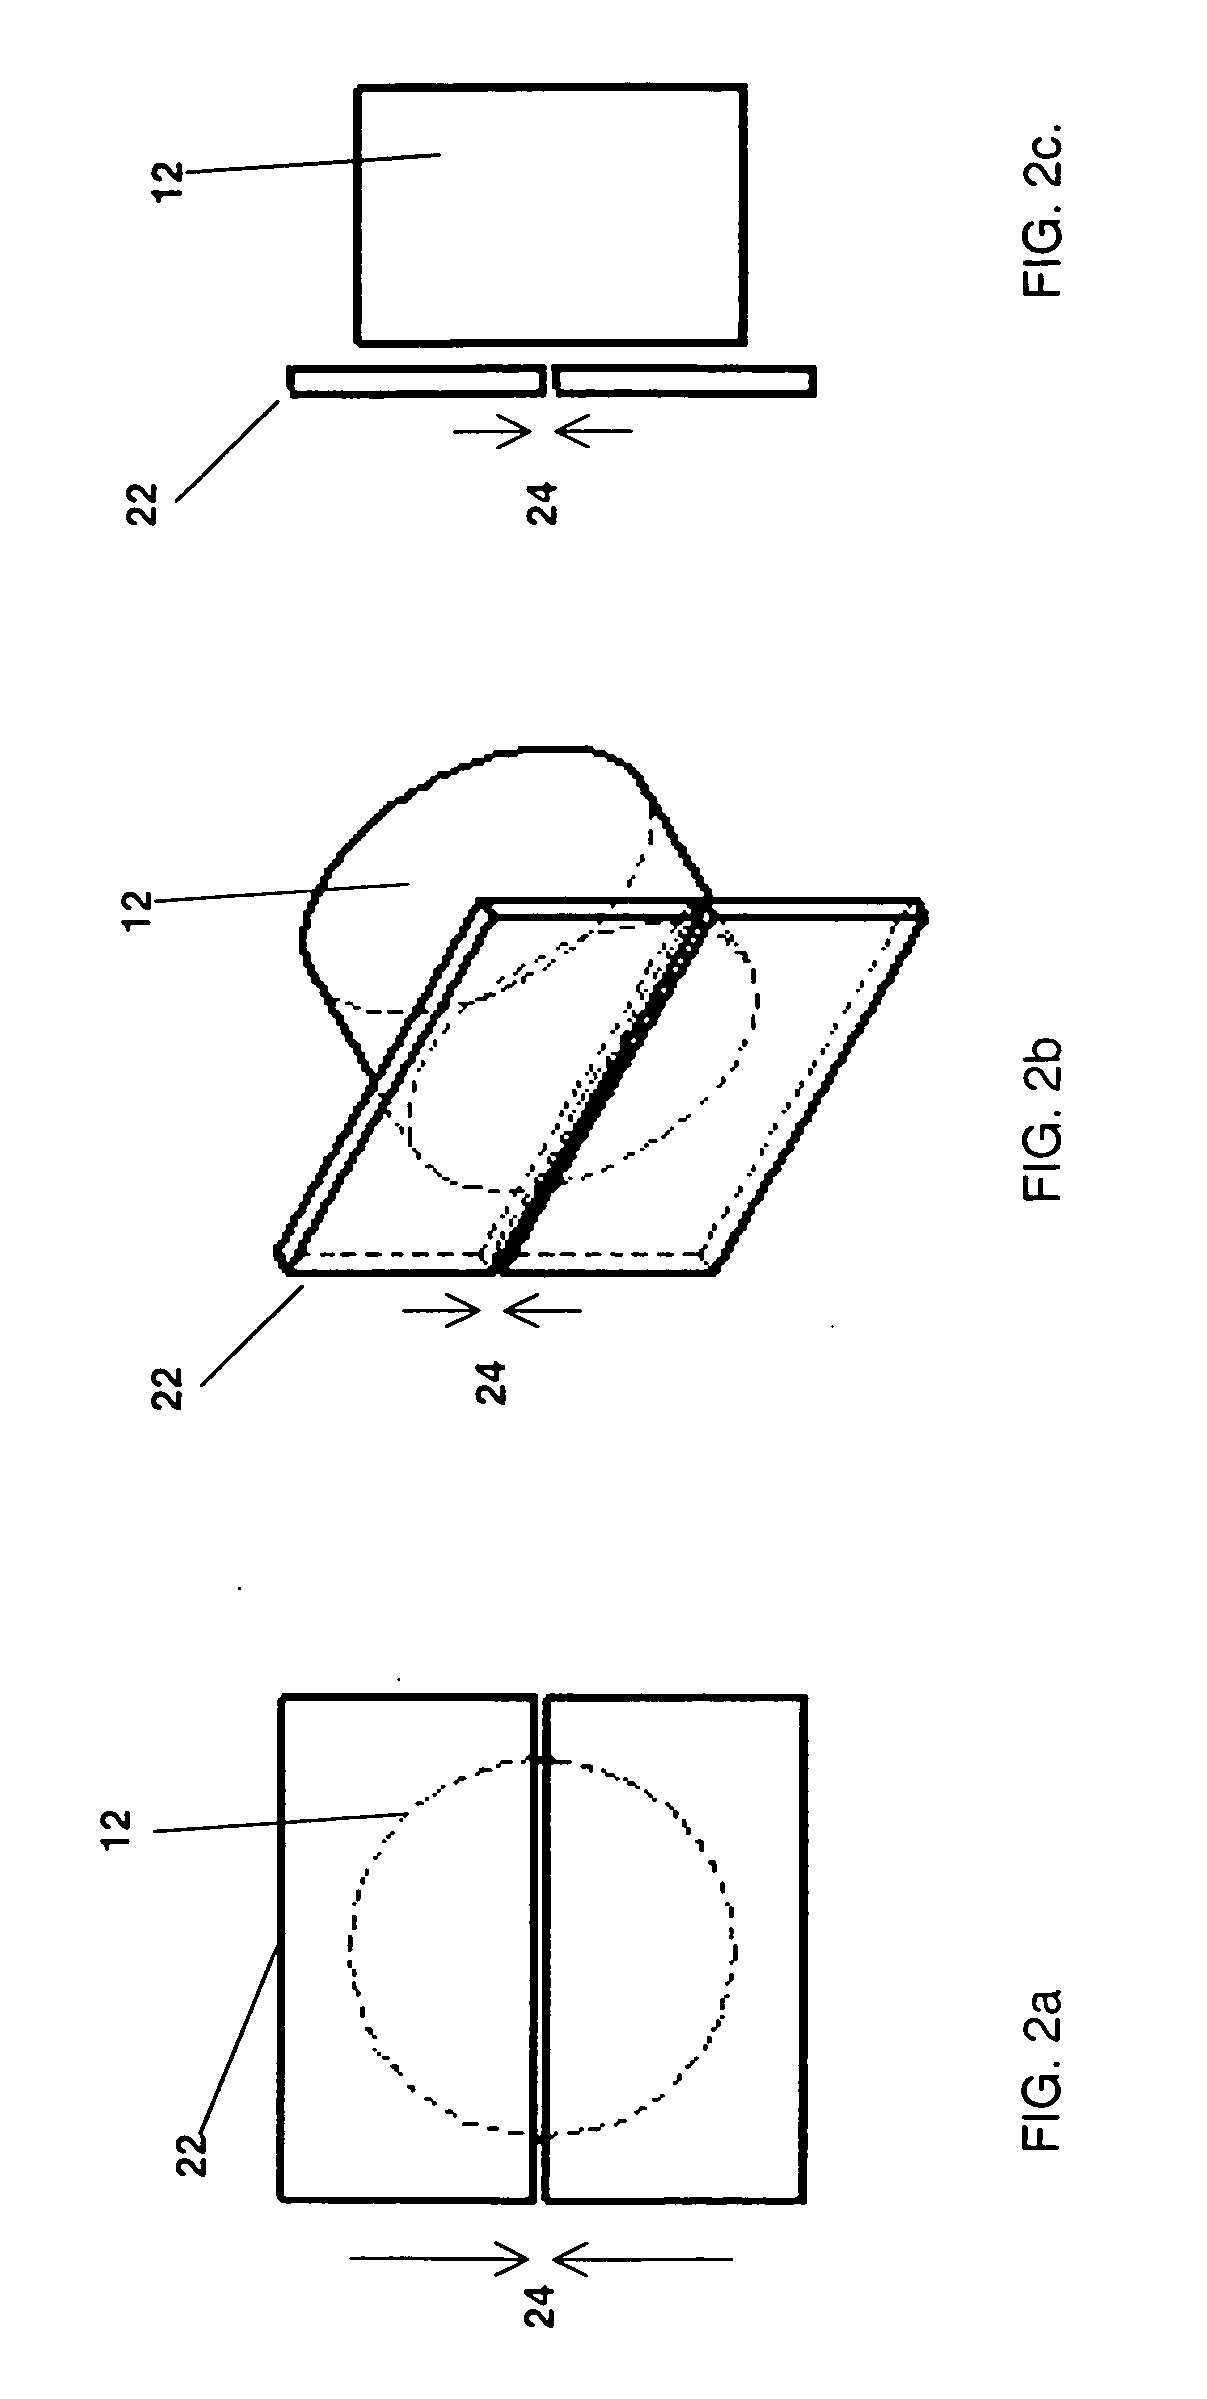 Apparatus and method for detection of liquid droplets